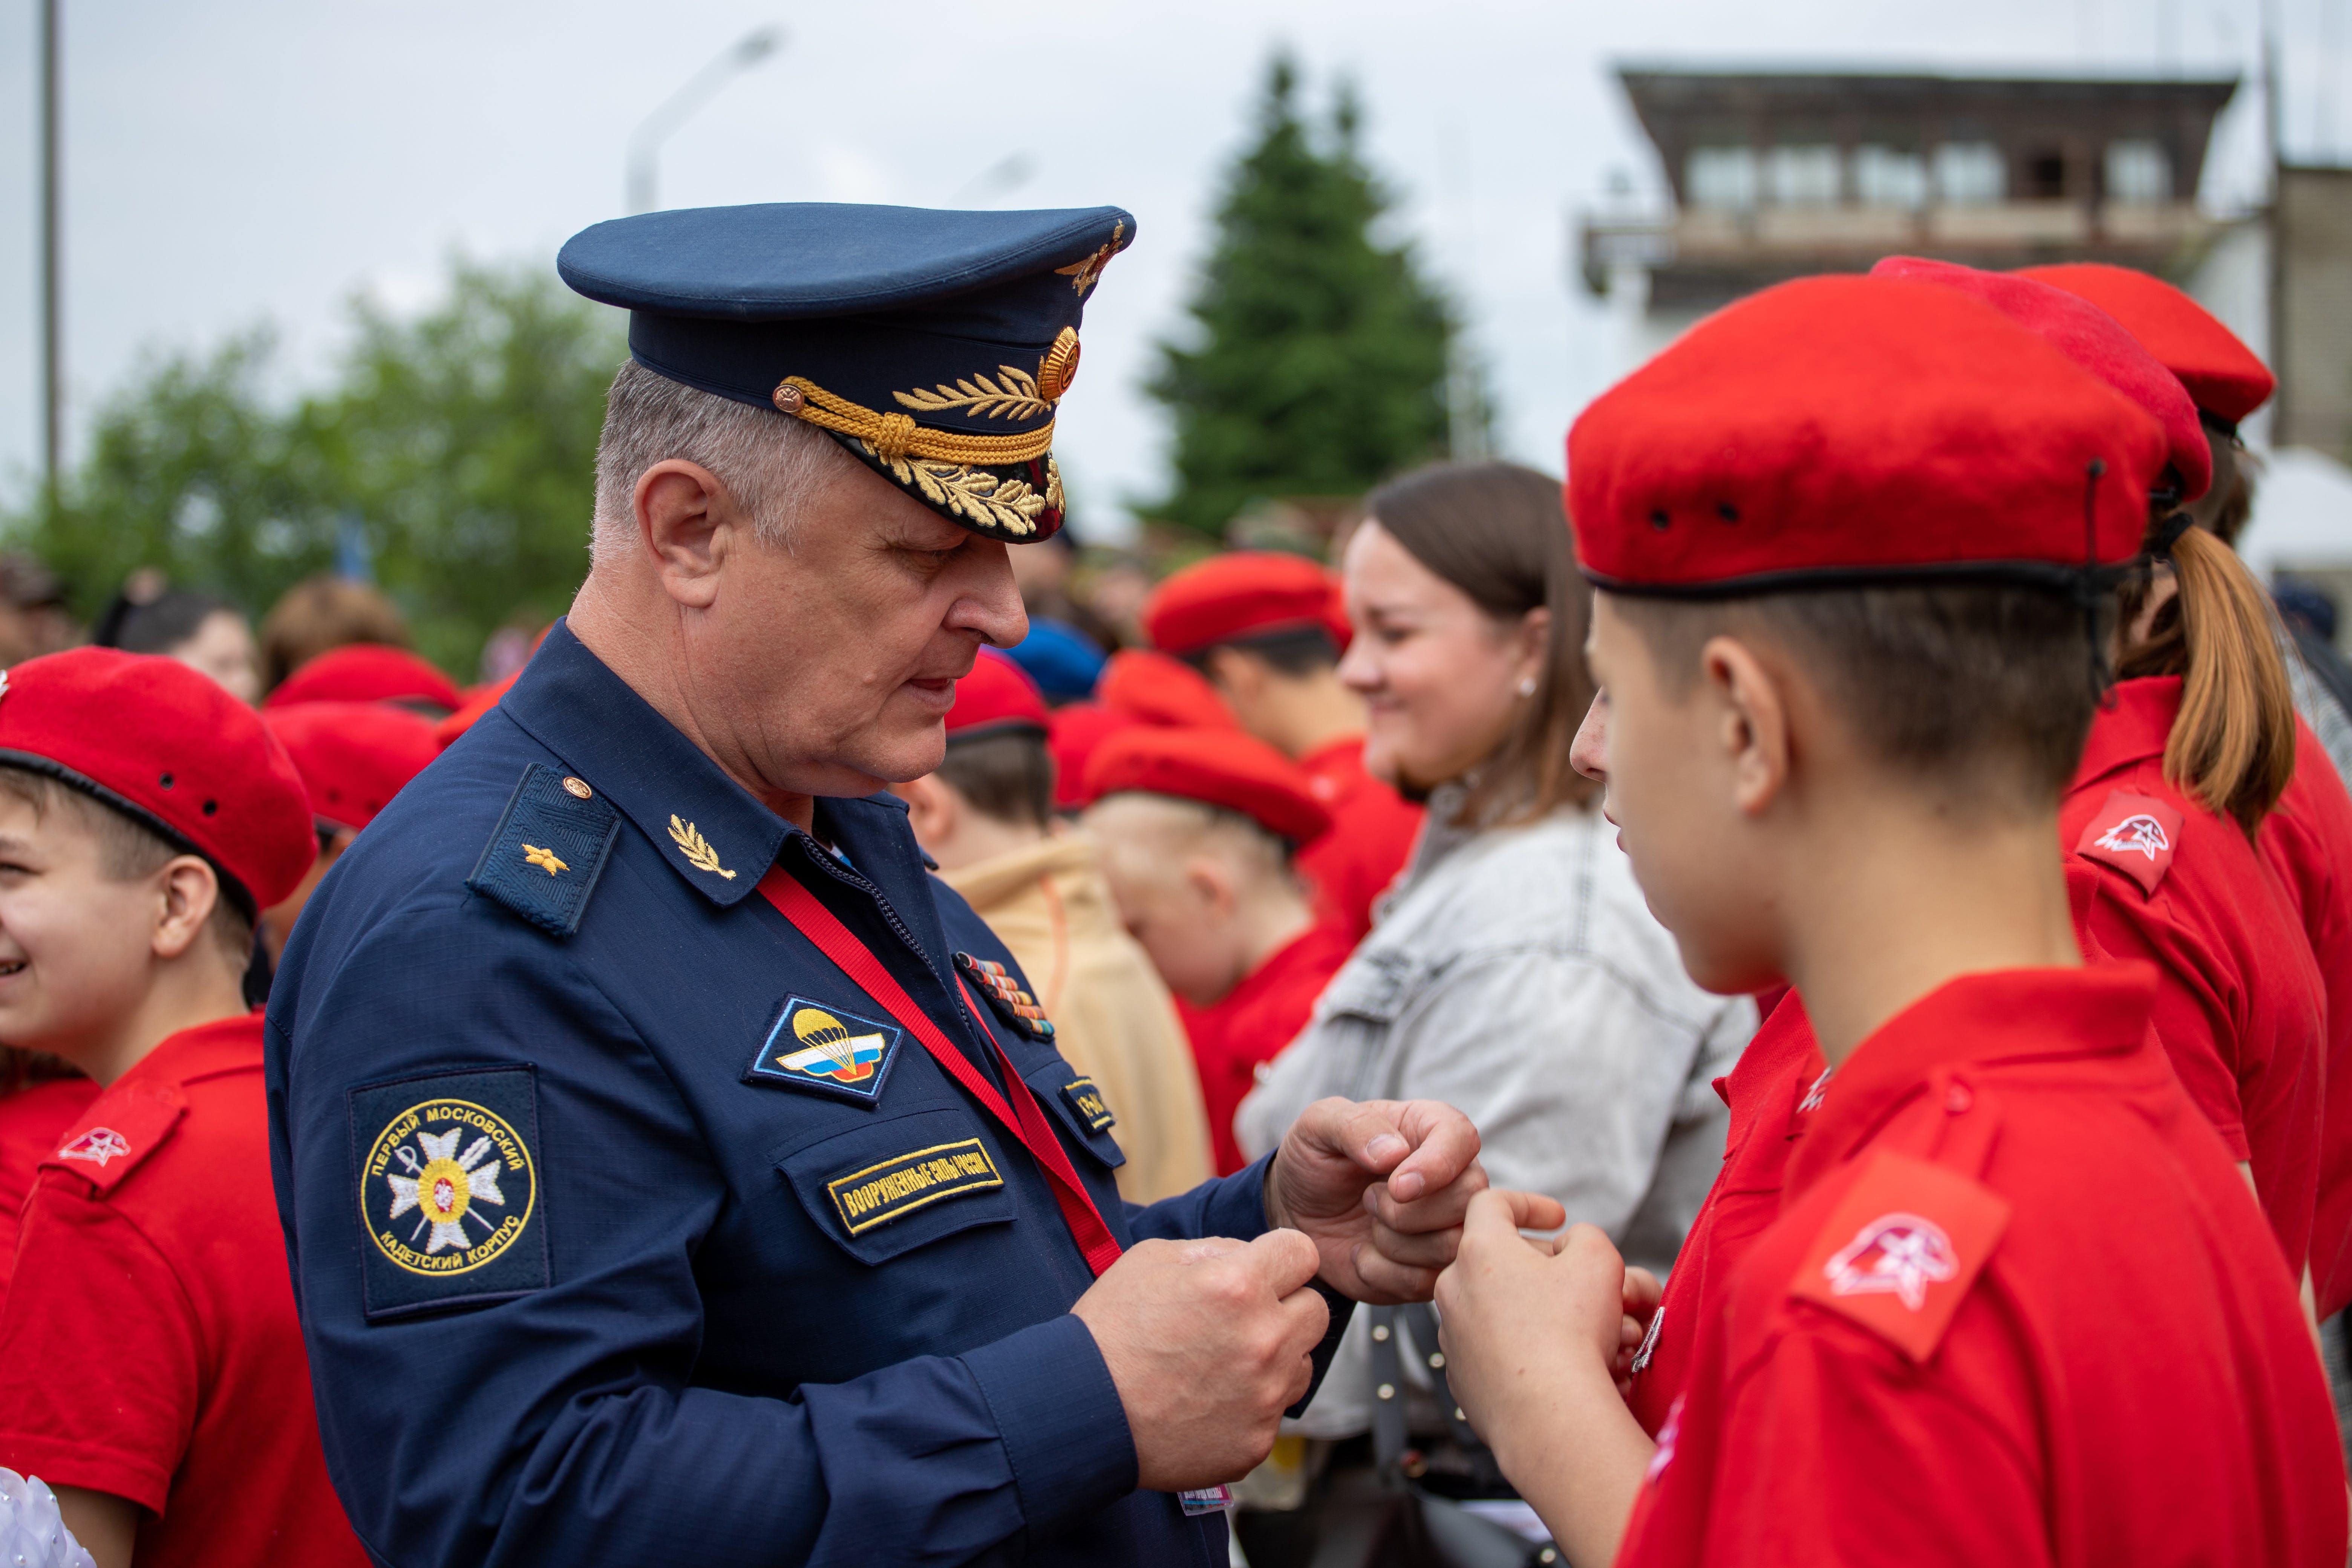 A military officer talking to students | Source: Pexels